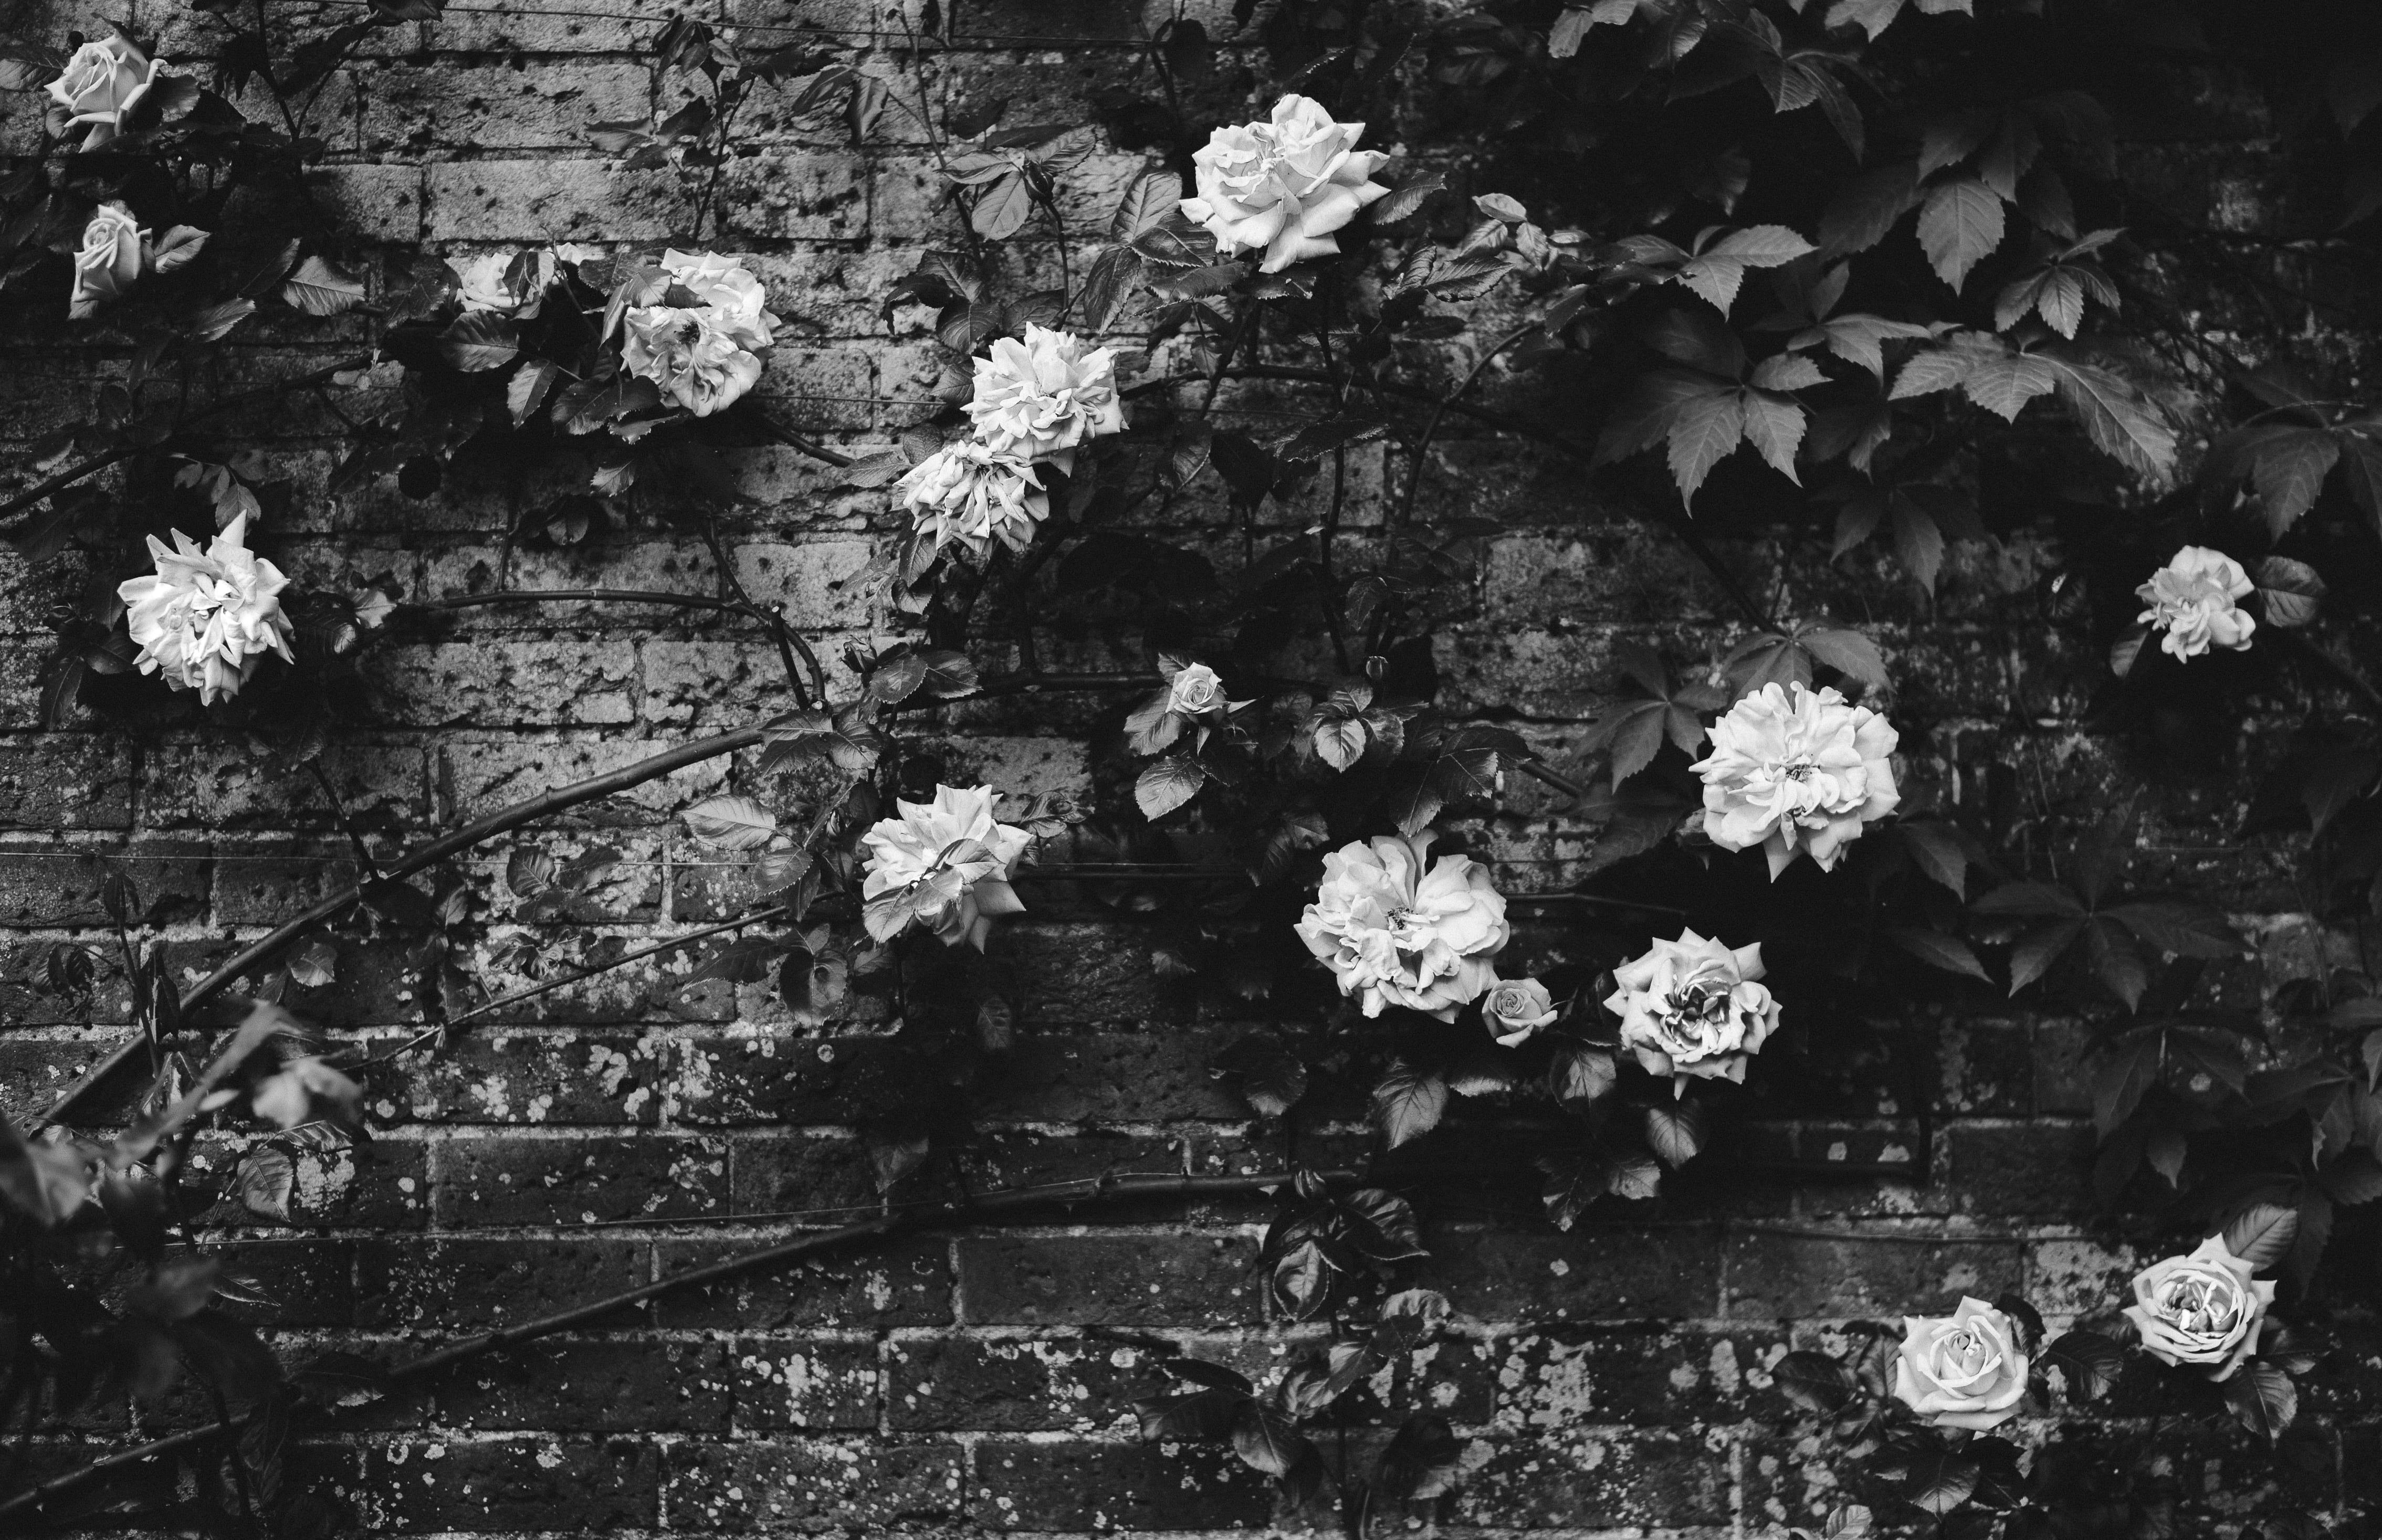 Black and white roses, grayscale photography of roses on wall